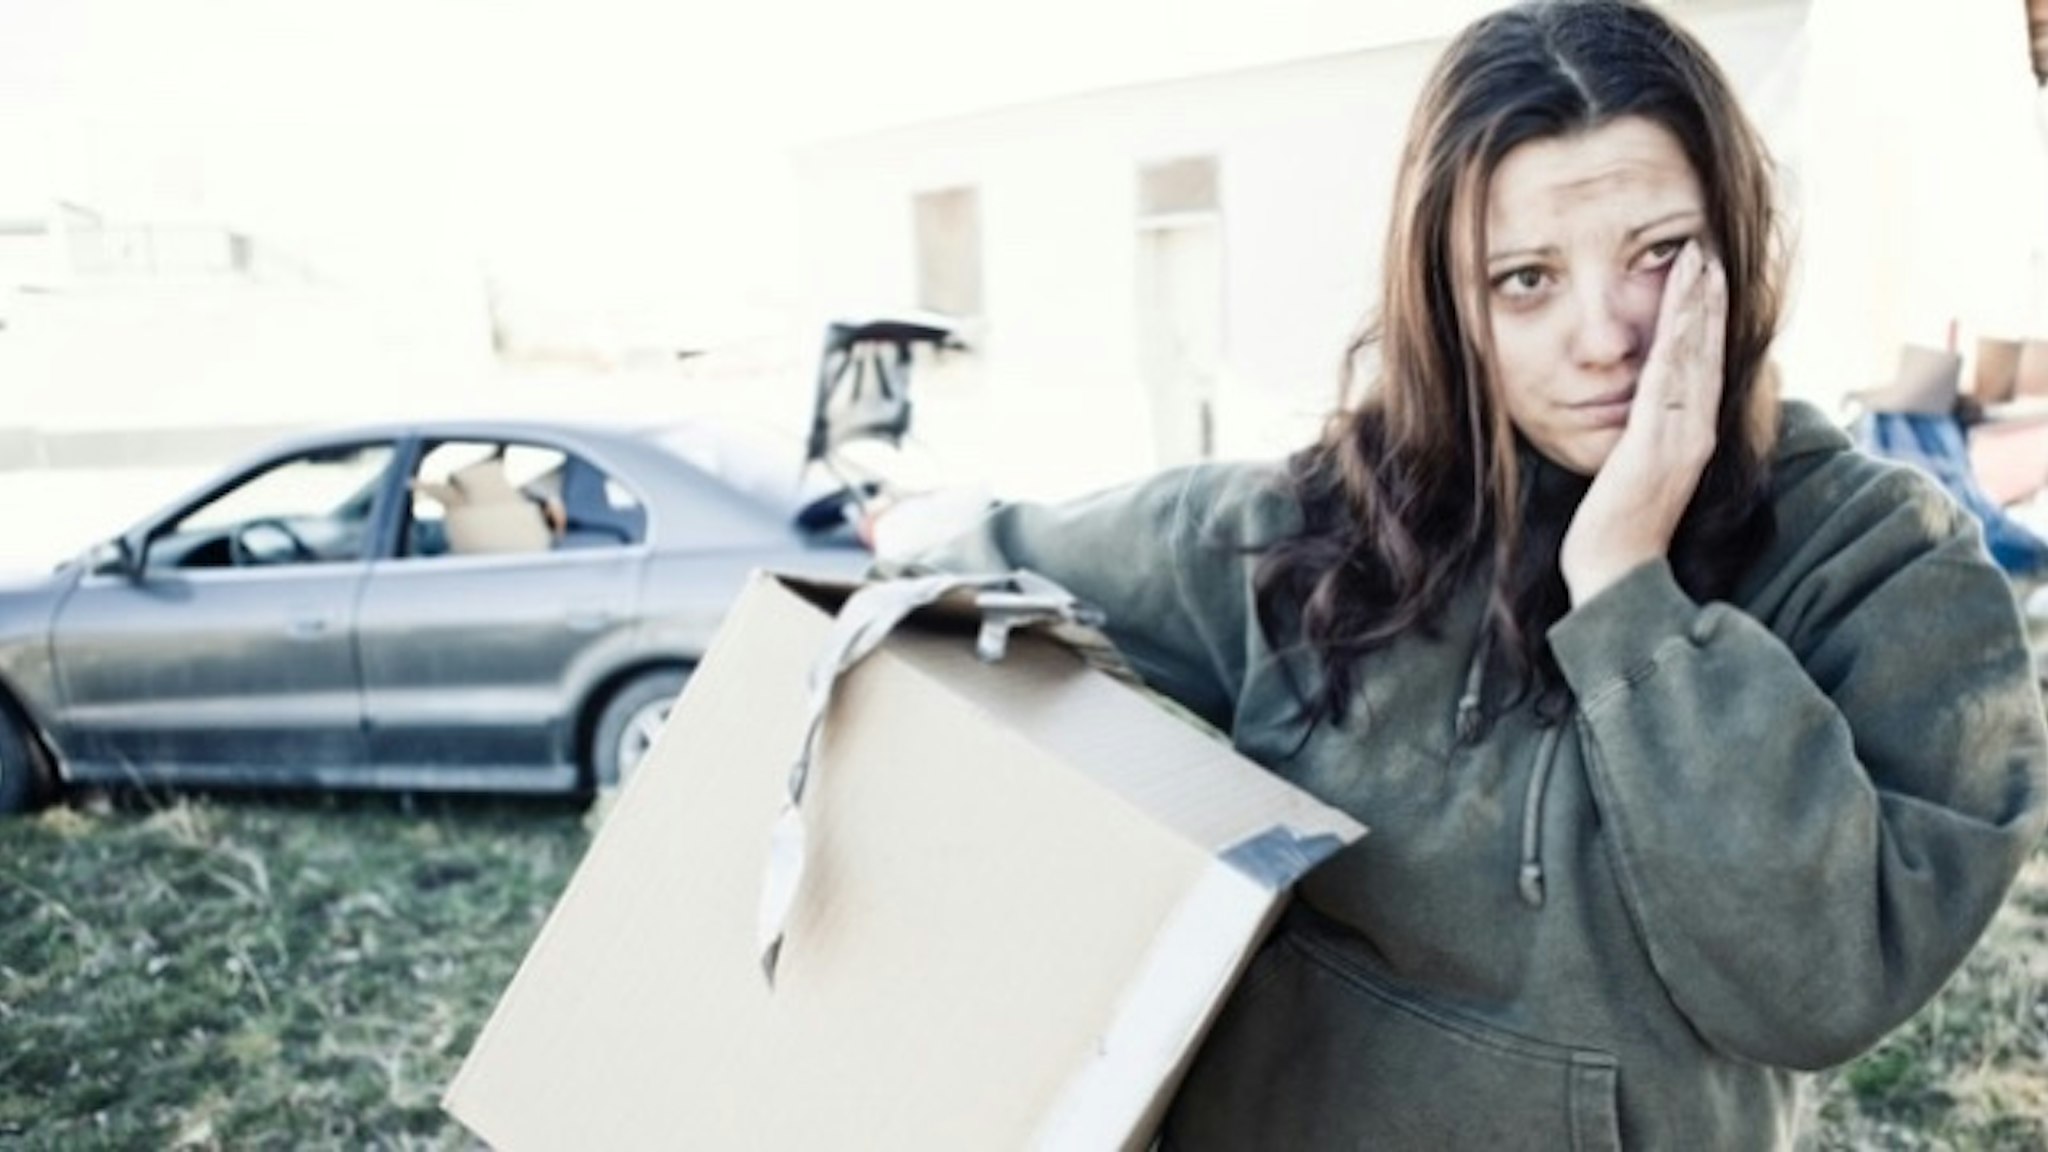 Homeless Woman Living Out of a Car - stock photo